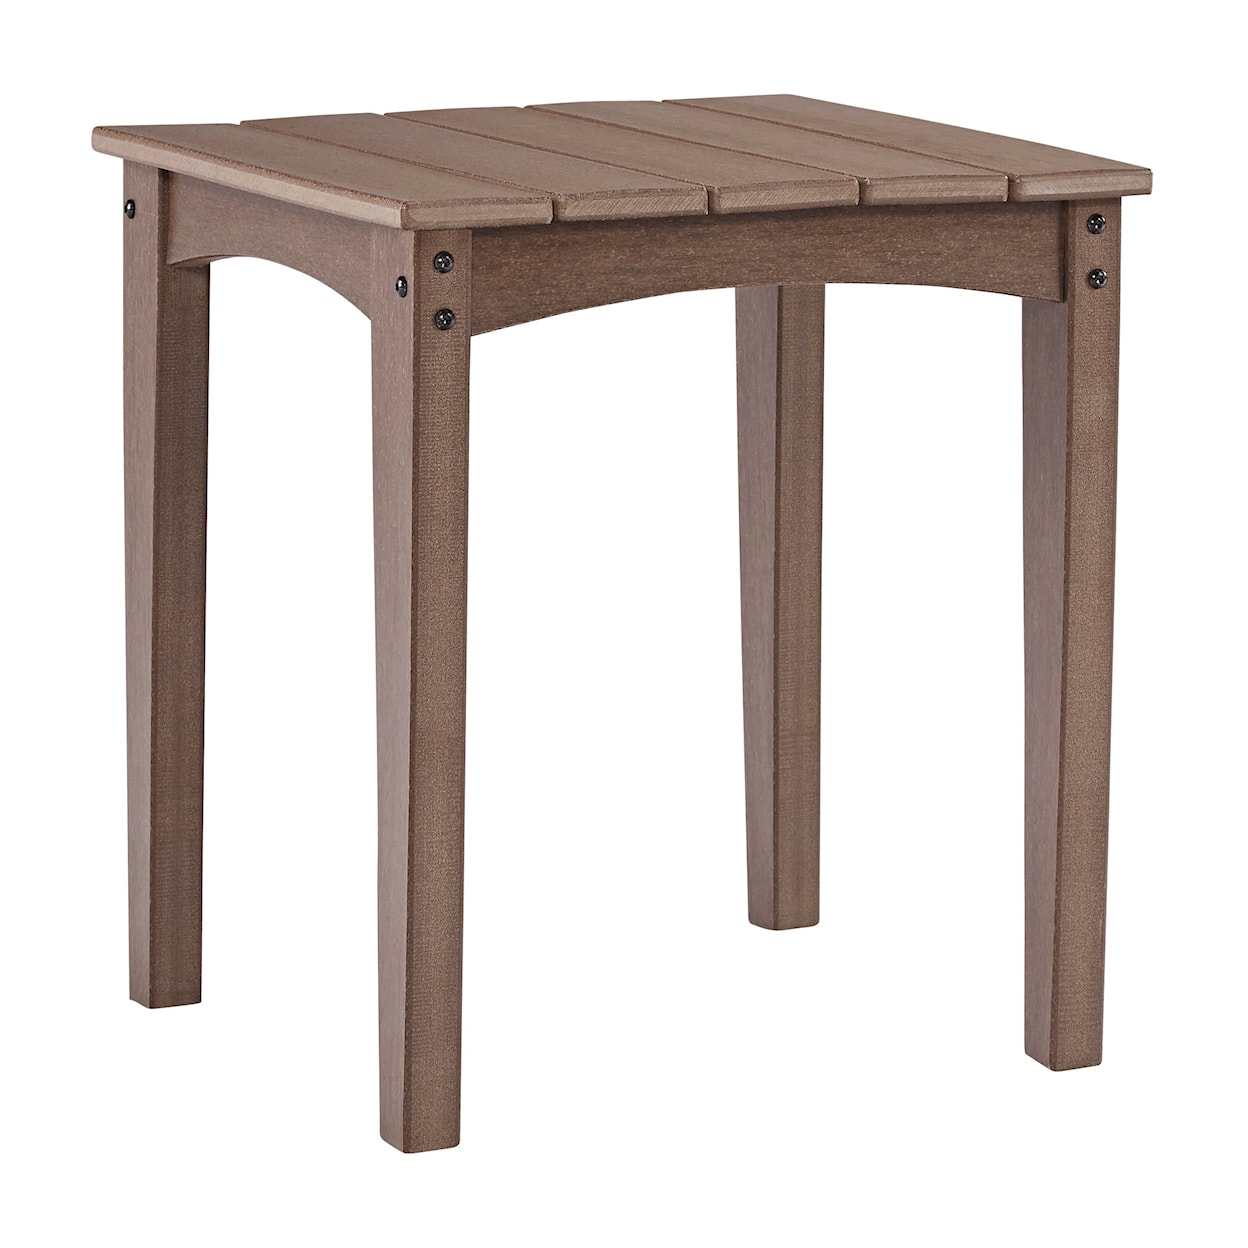 Signature Design by Ashley Emmeline Outdoor End Table